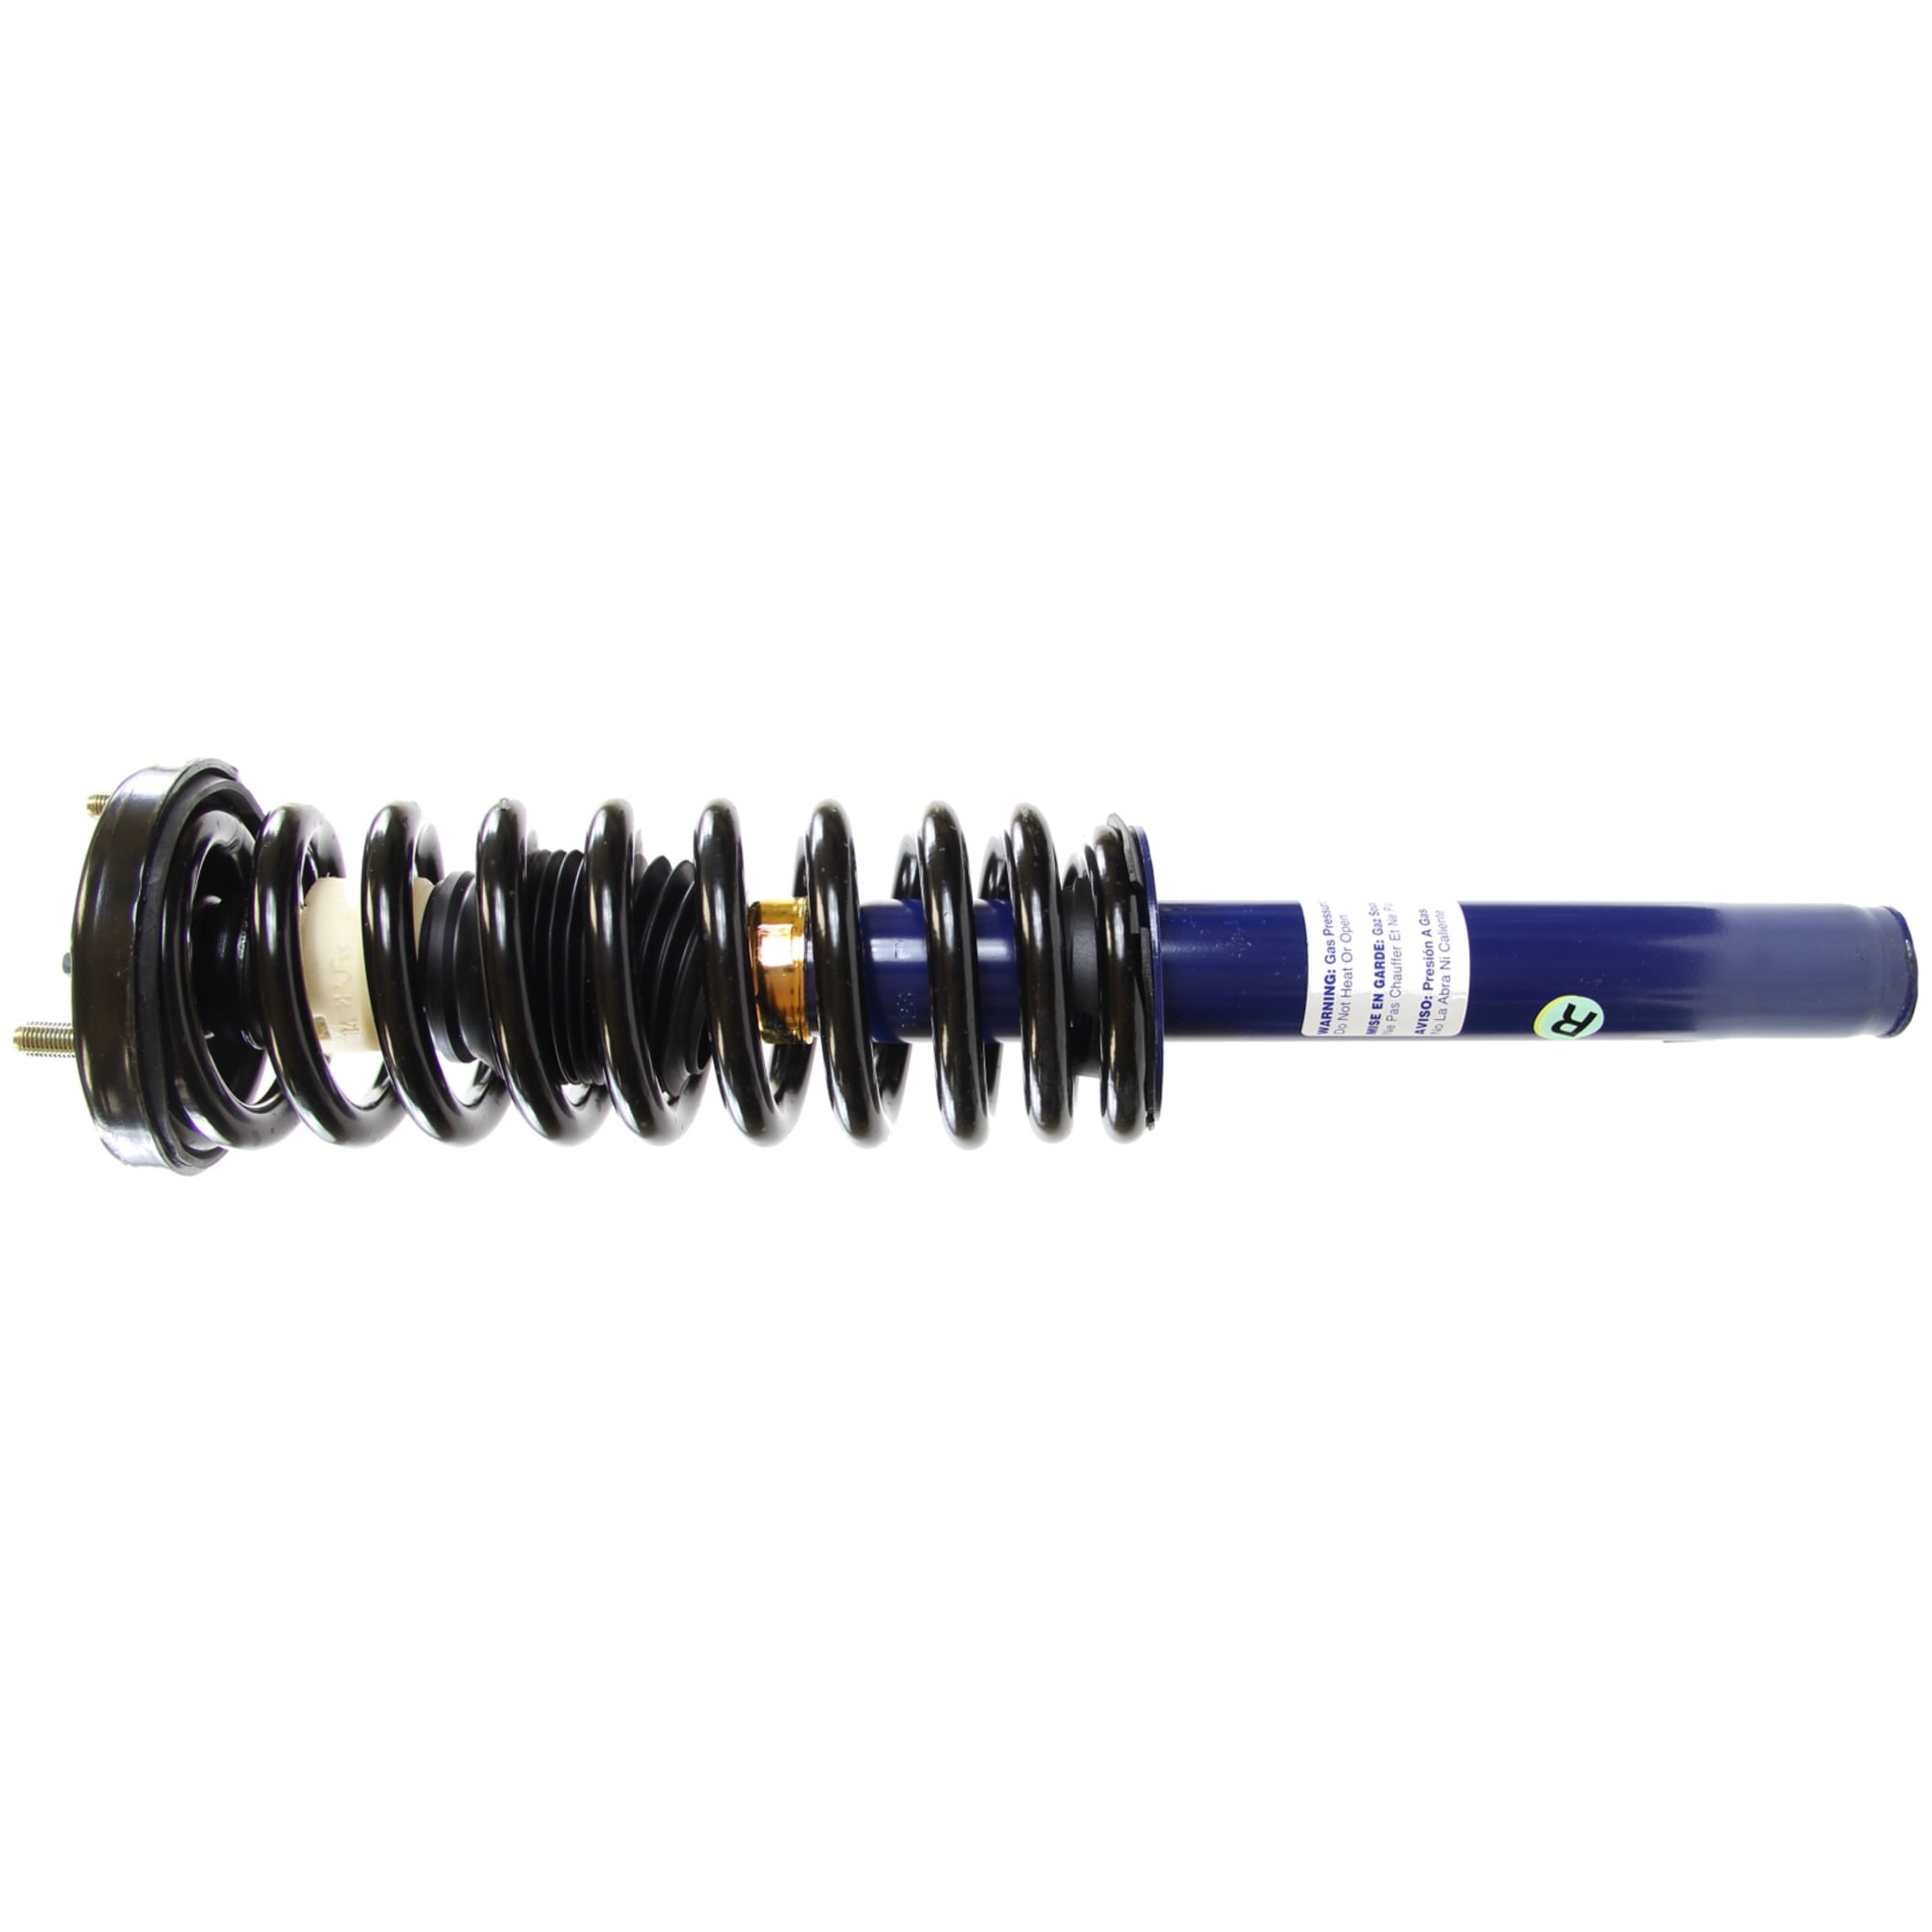 RoadMatic Complete Strut Assembly 